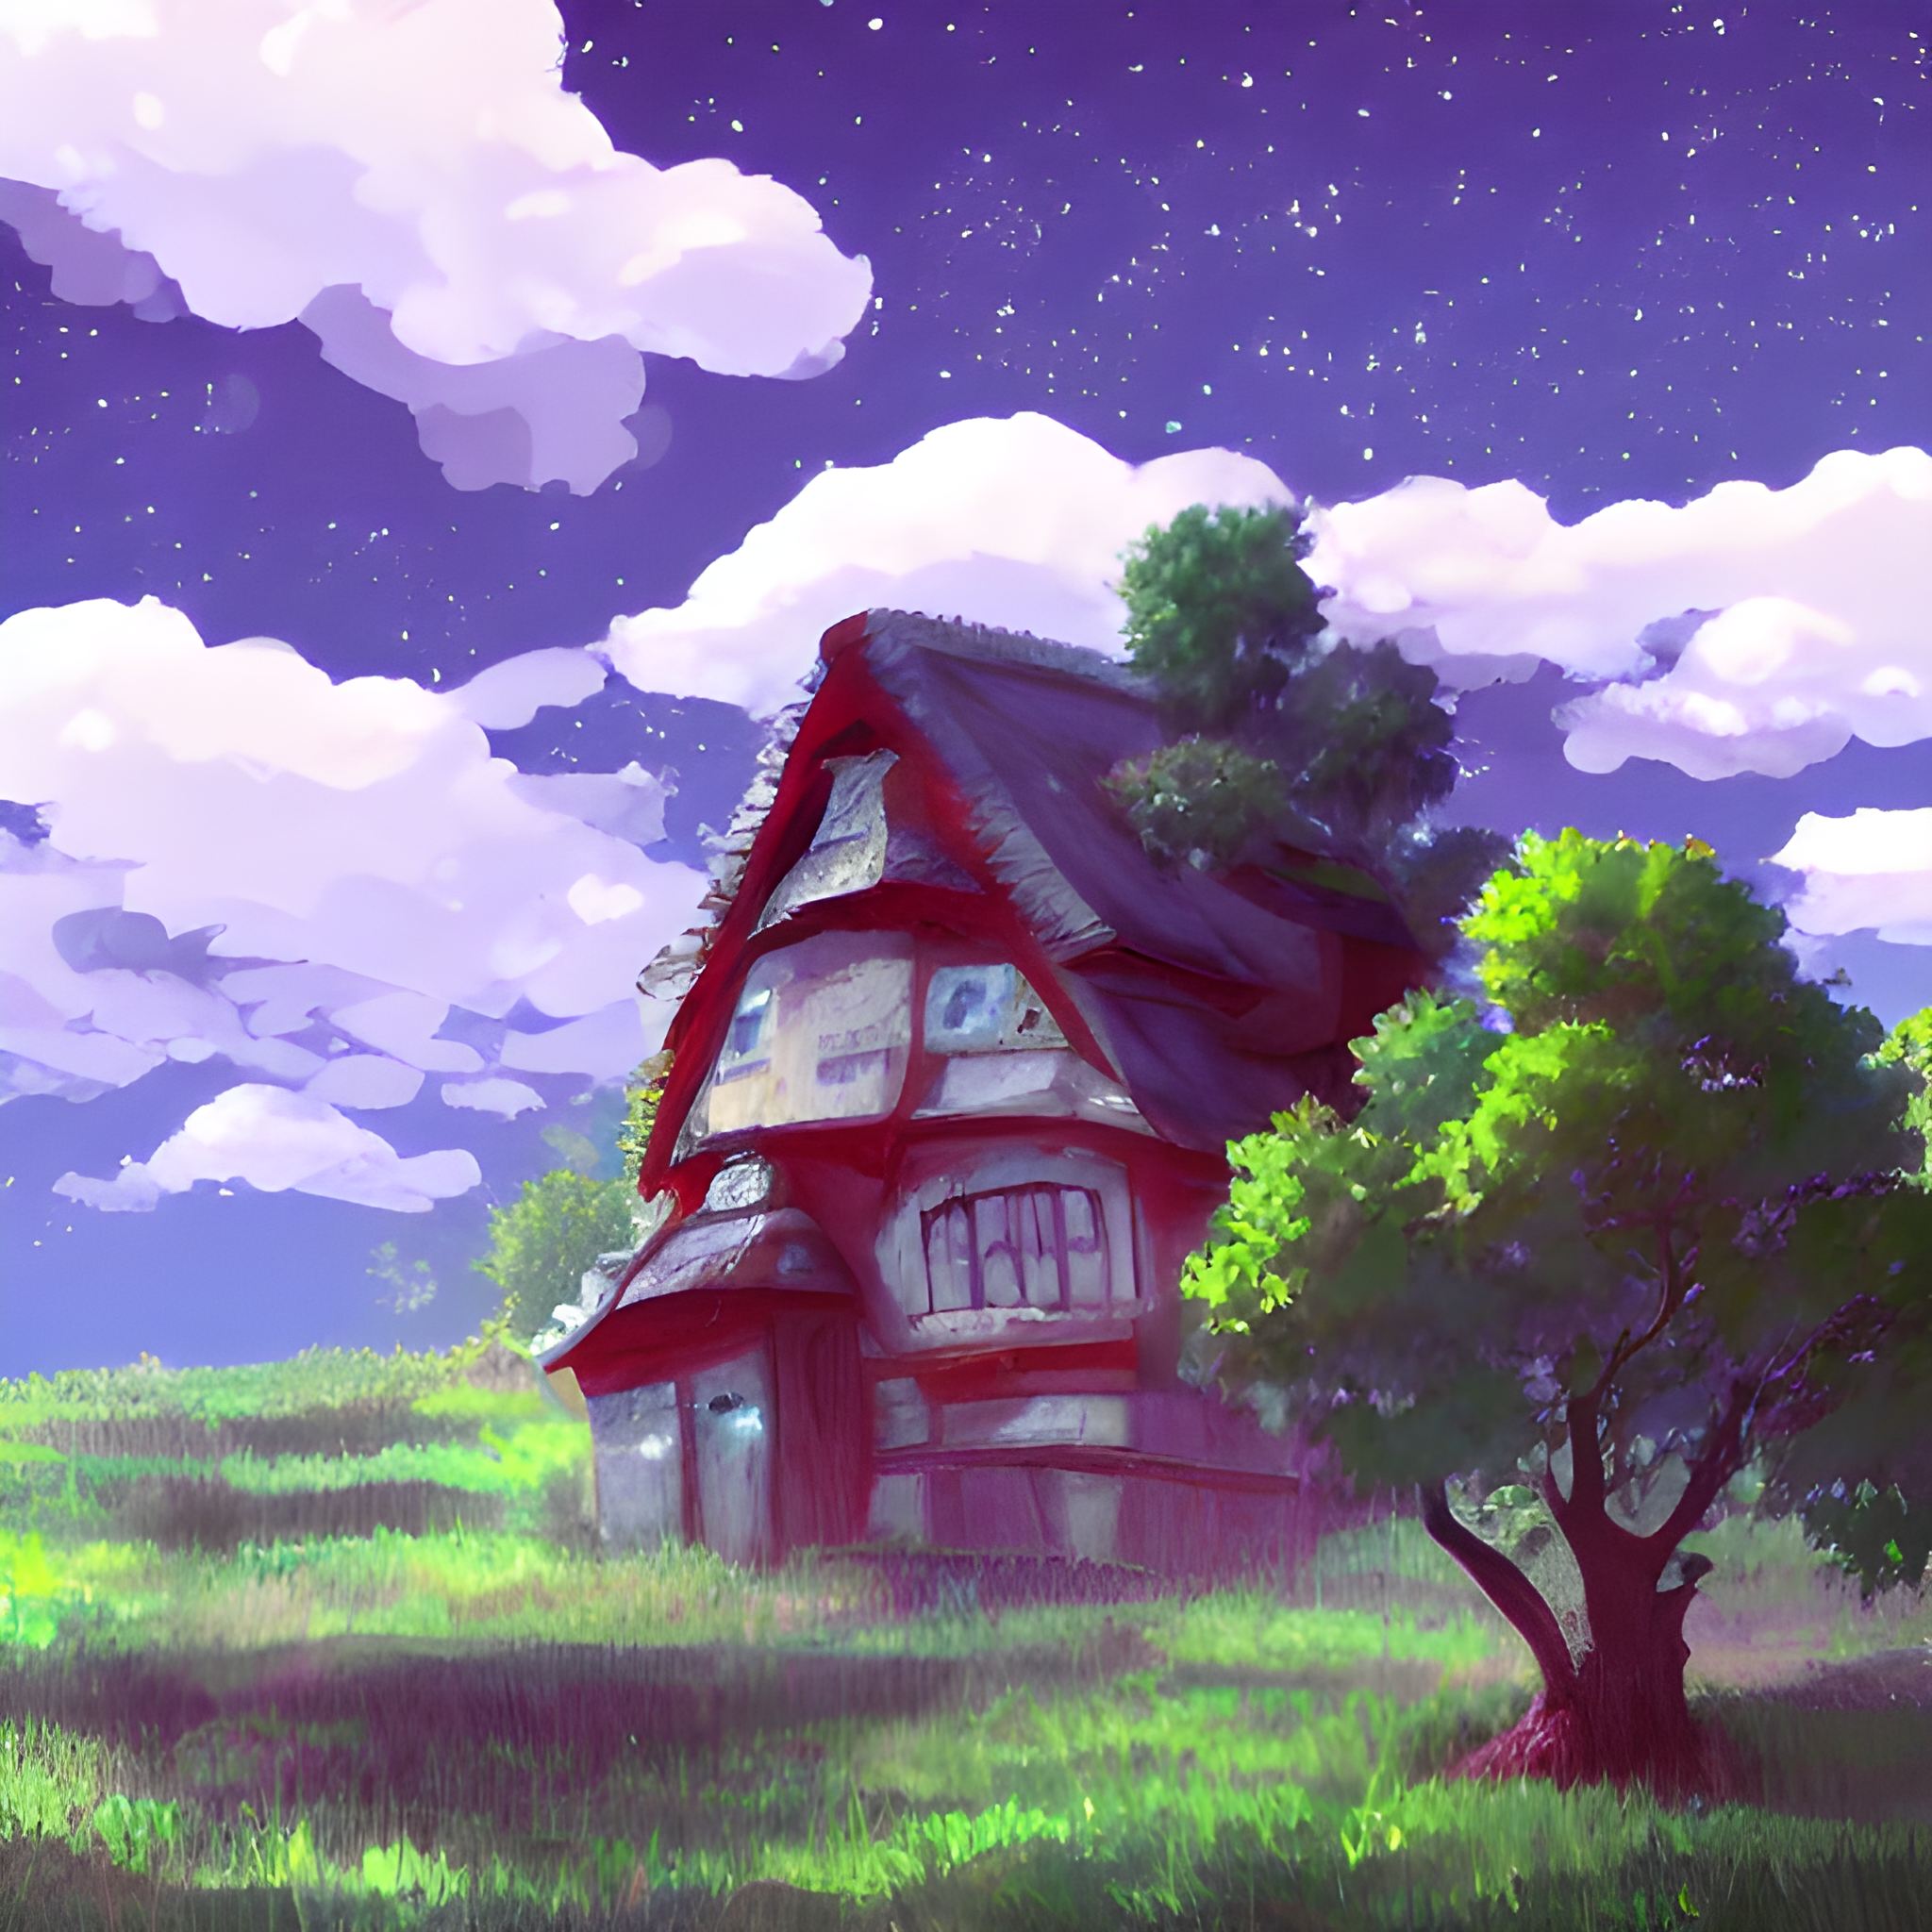 https://cloud-dj99g5ayu-hack-club-bot.vercel.app/0artstation__studio_ghibli__landscape_with_a_house_on_it_and_beautiful_clouds__beautiful_trees__stars_made_out_of_computers__illustration__animation__stable_1973216926.png